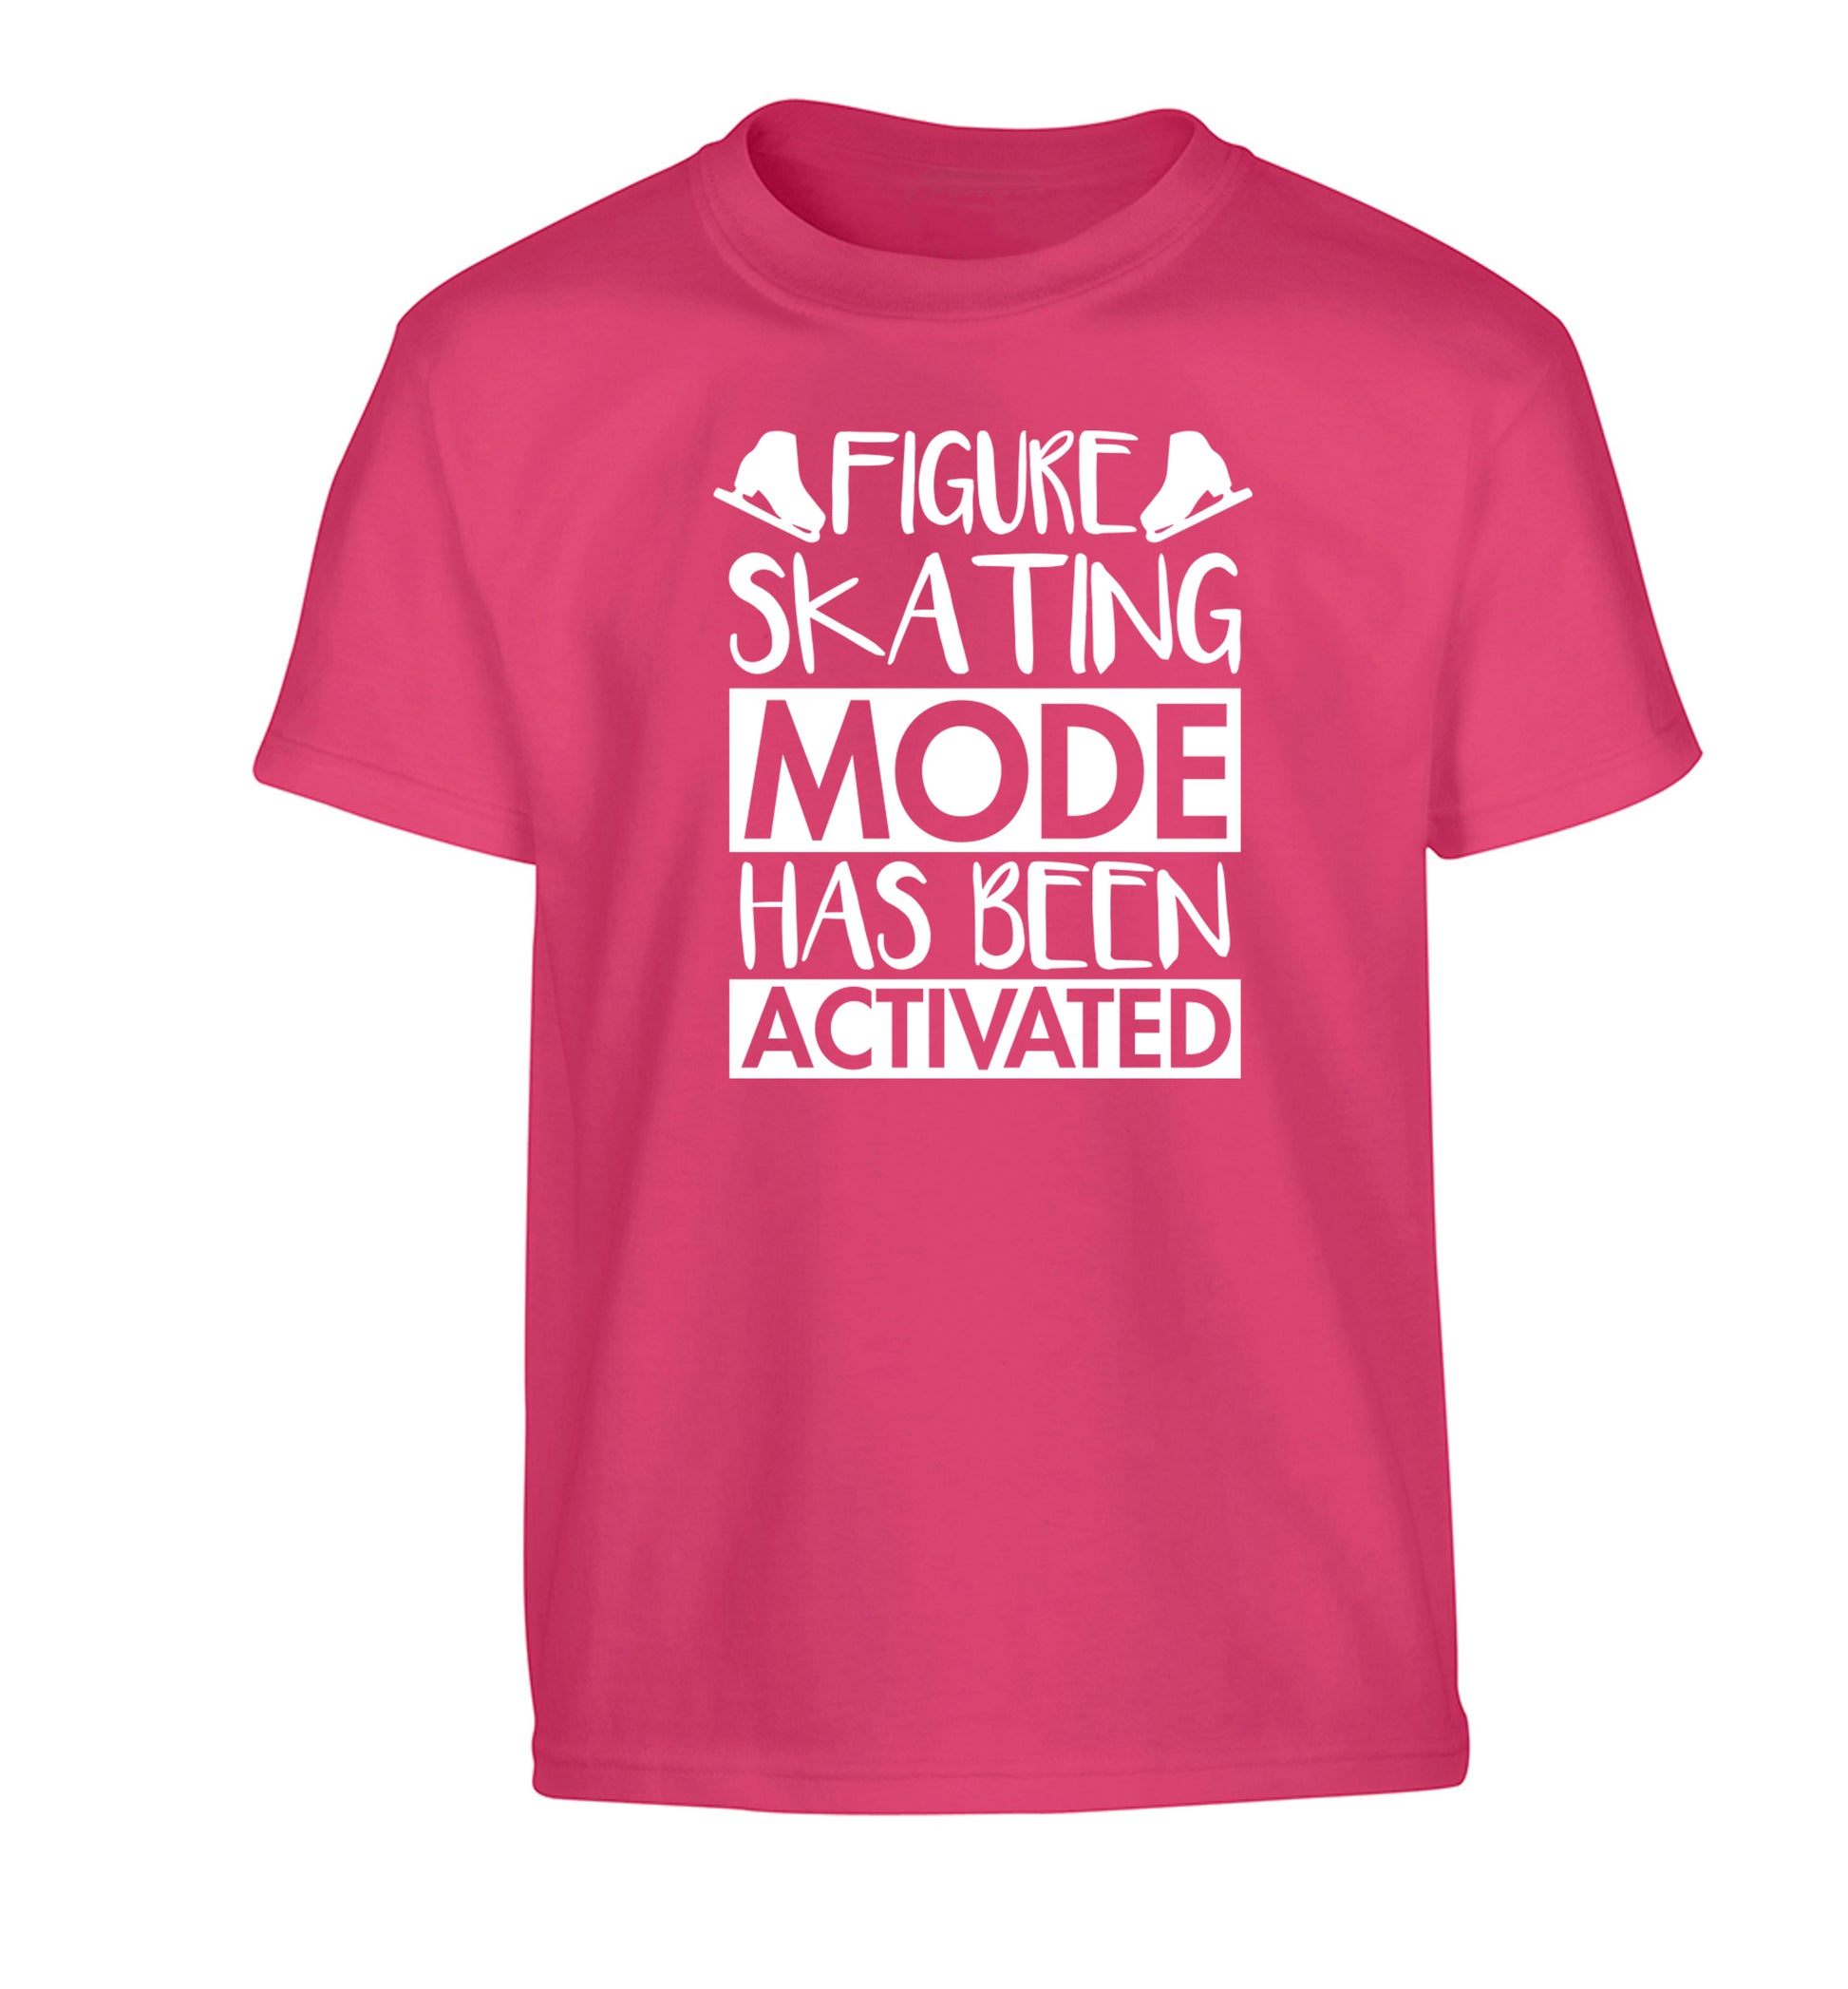 Figure skating mode activated Children's pink Tshirt 12-14 Years